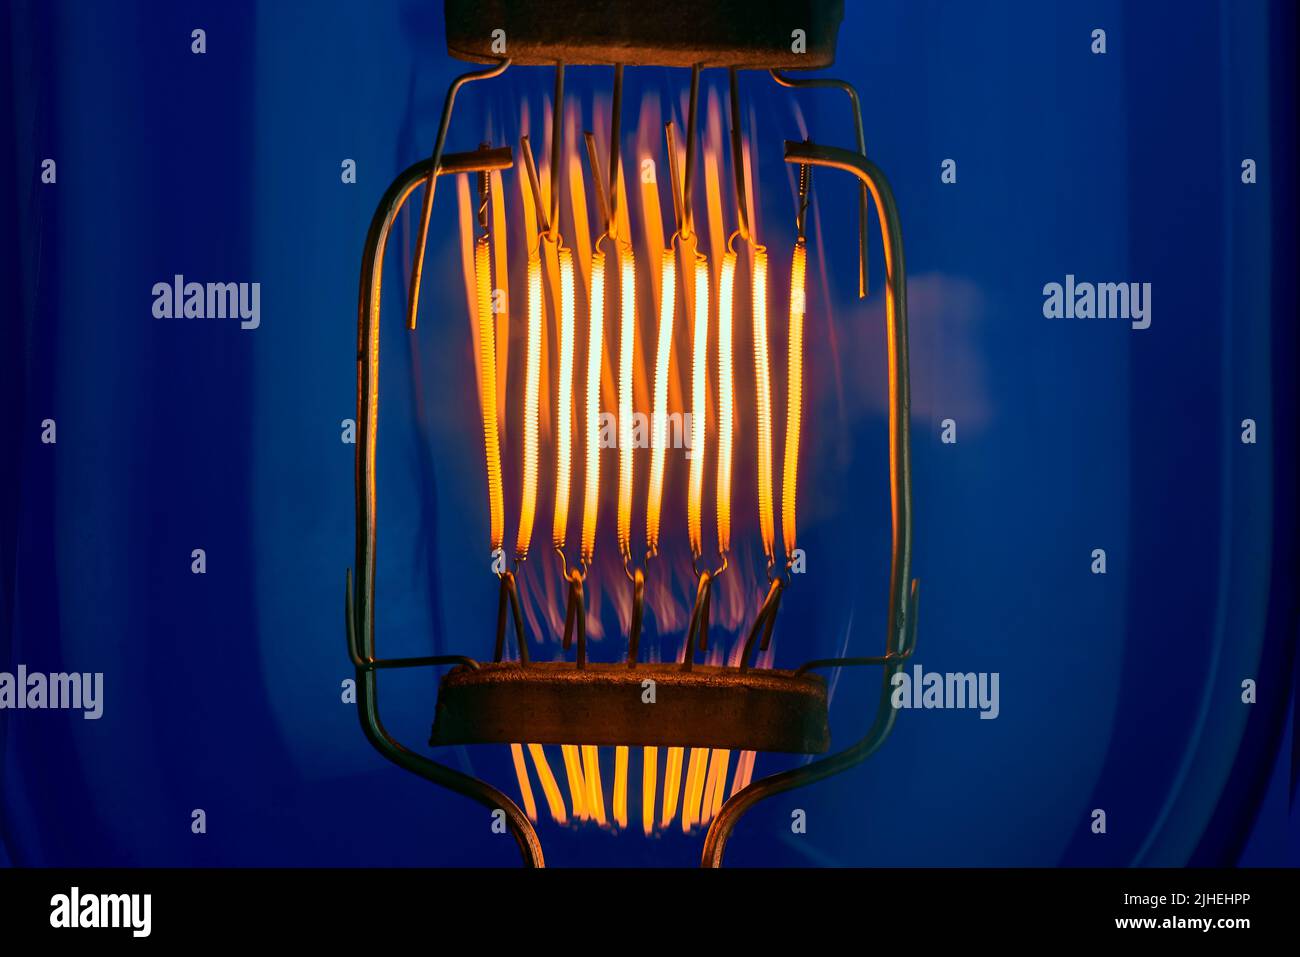 tungsten filament of high power incandescent lamp on blue background close up Stock Photo